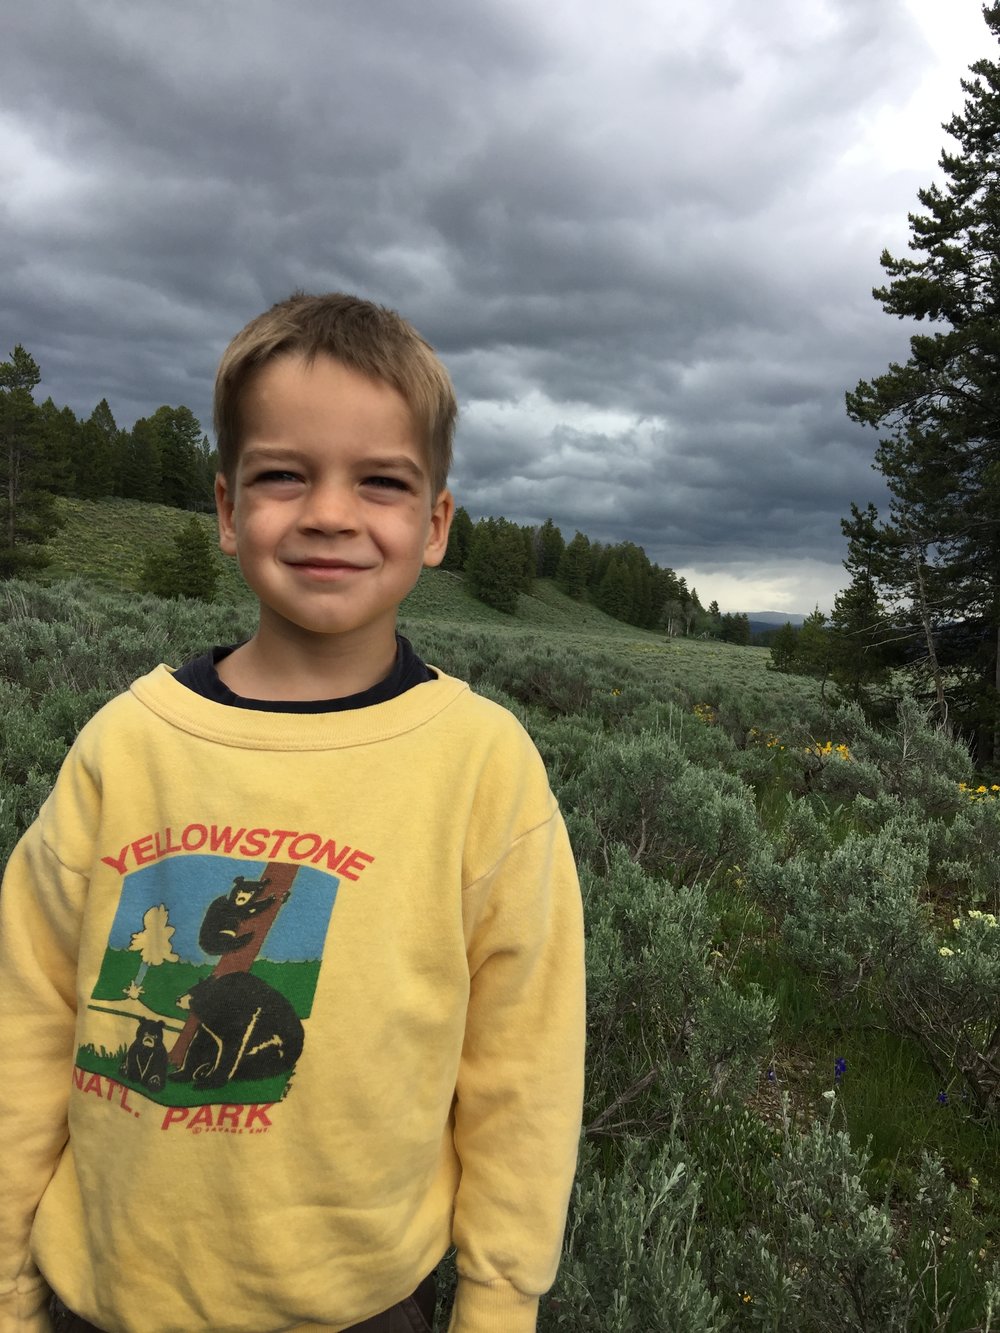  In his mom's old sweatshirt, with black bears in the background.&nbsp; We could see them with binoculars!&nbsp; GTNP 